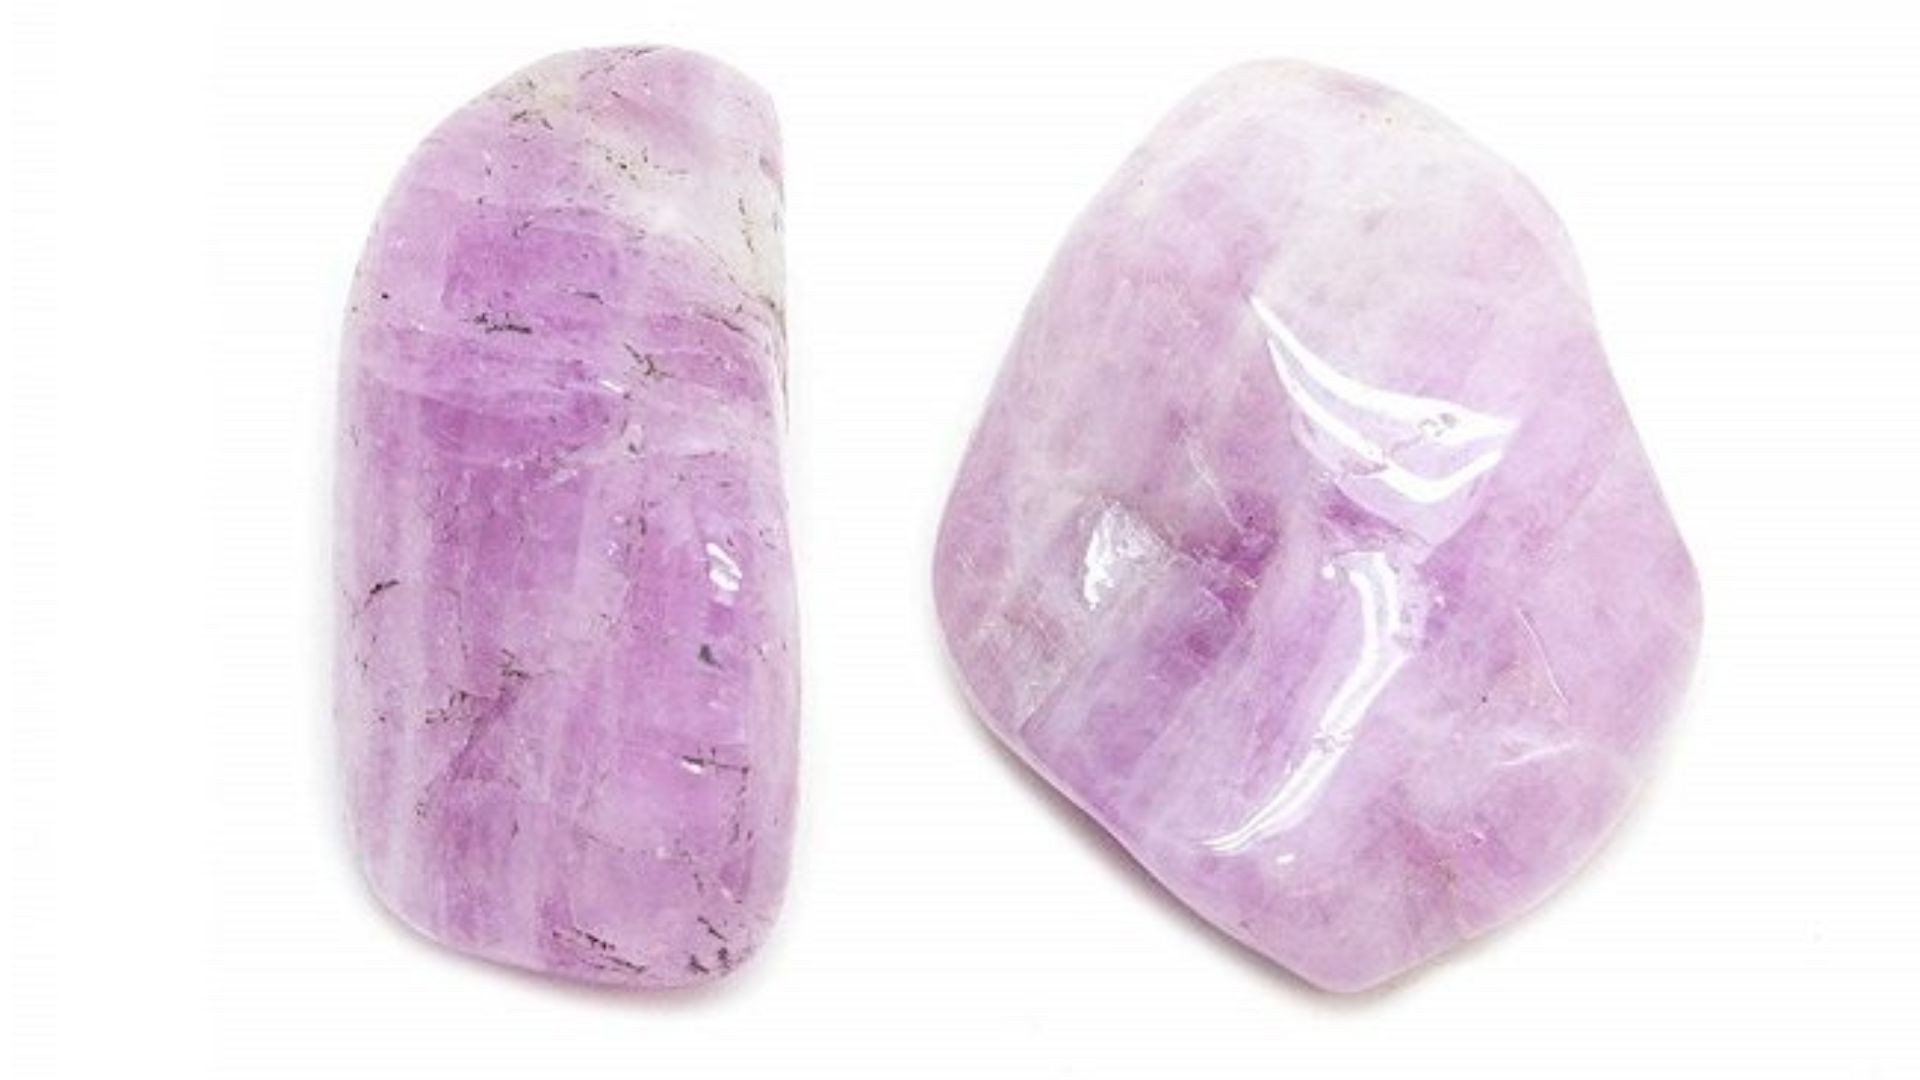 Kunzite Healing Crystals Meaning, Benefits, And Uses